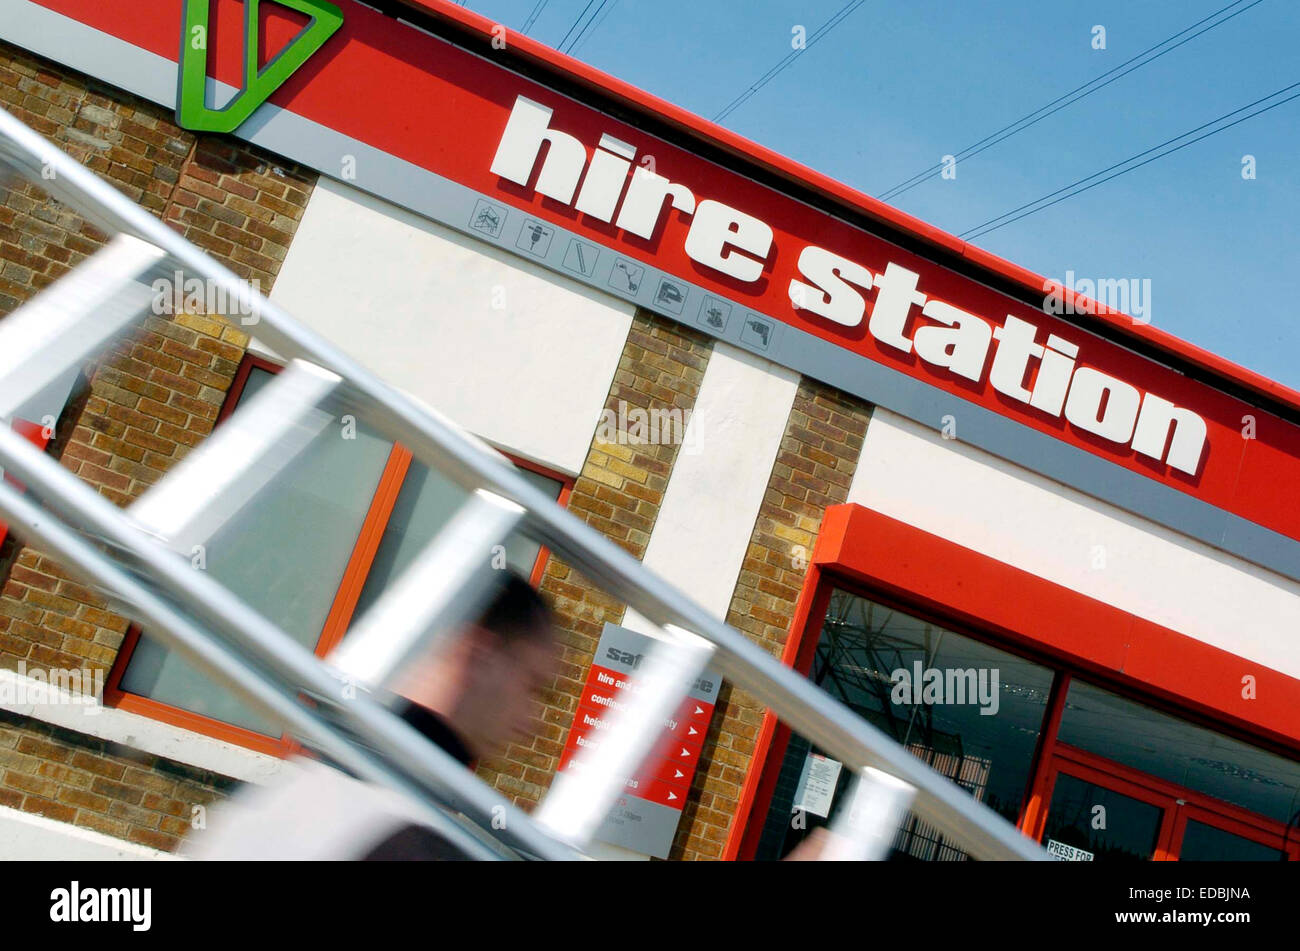 Illustrative image of The Hire Station depot in Canning Town, London. Stock Photo